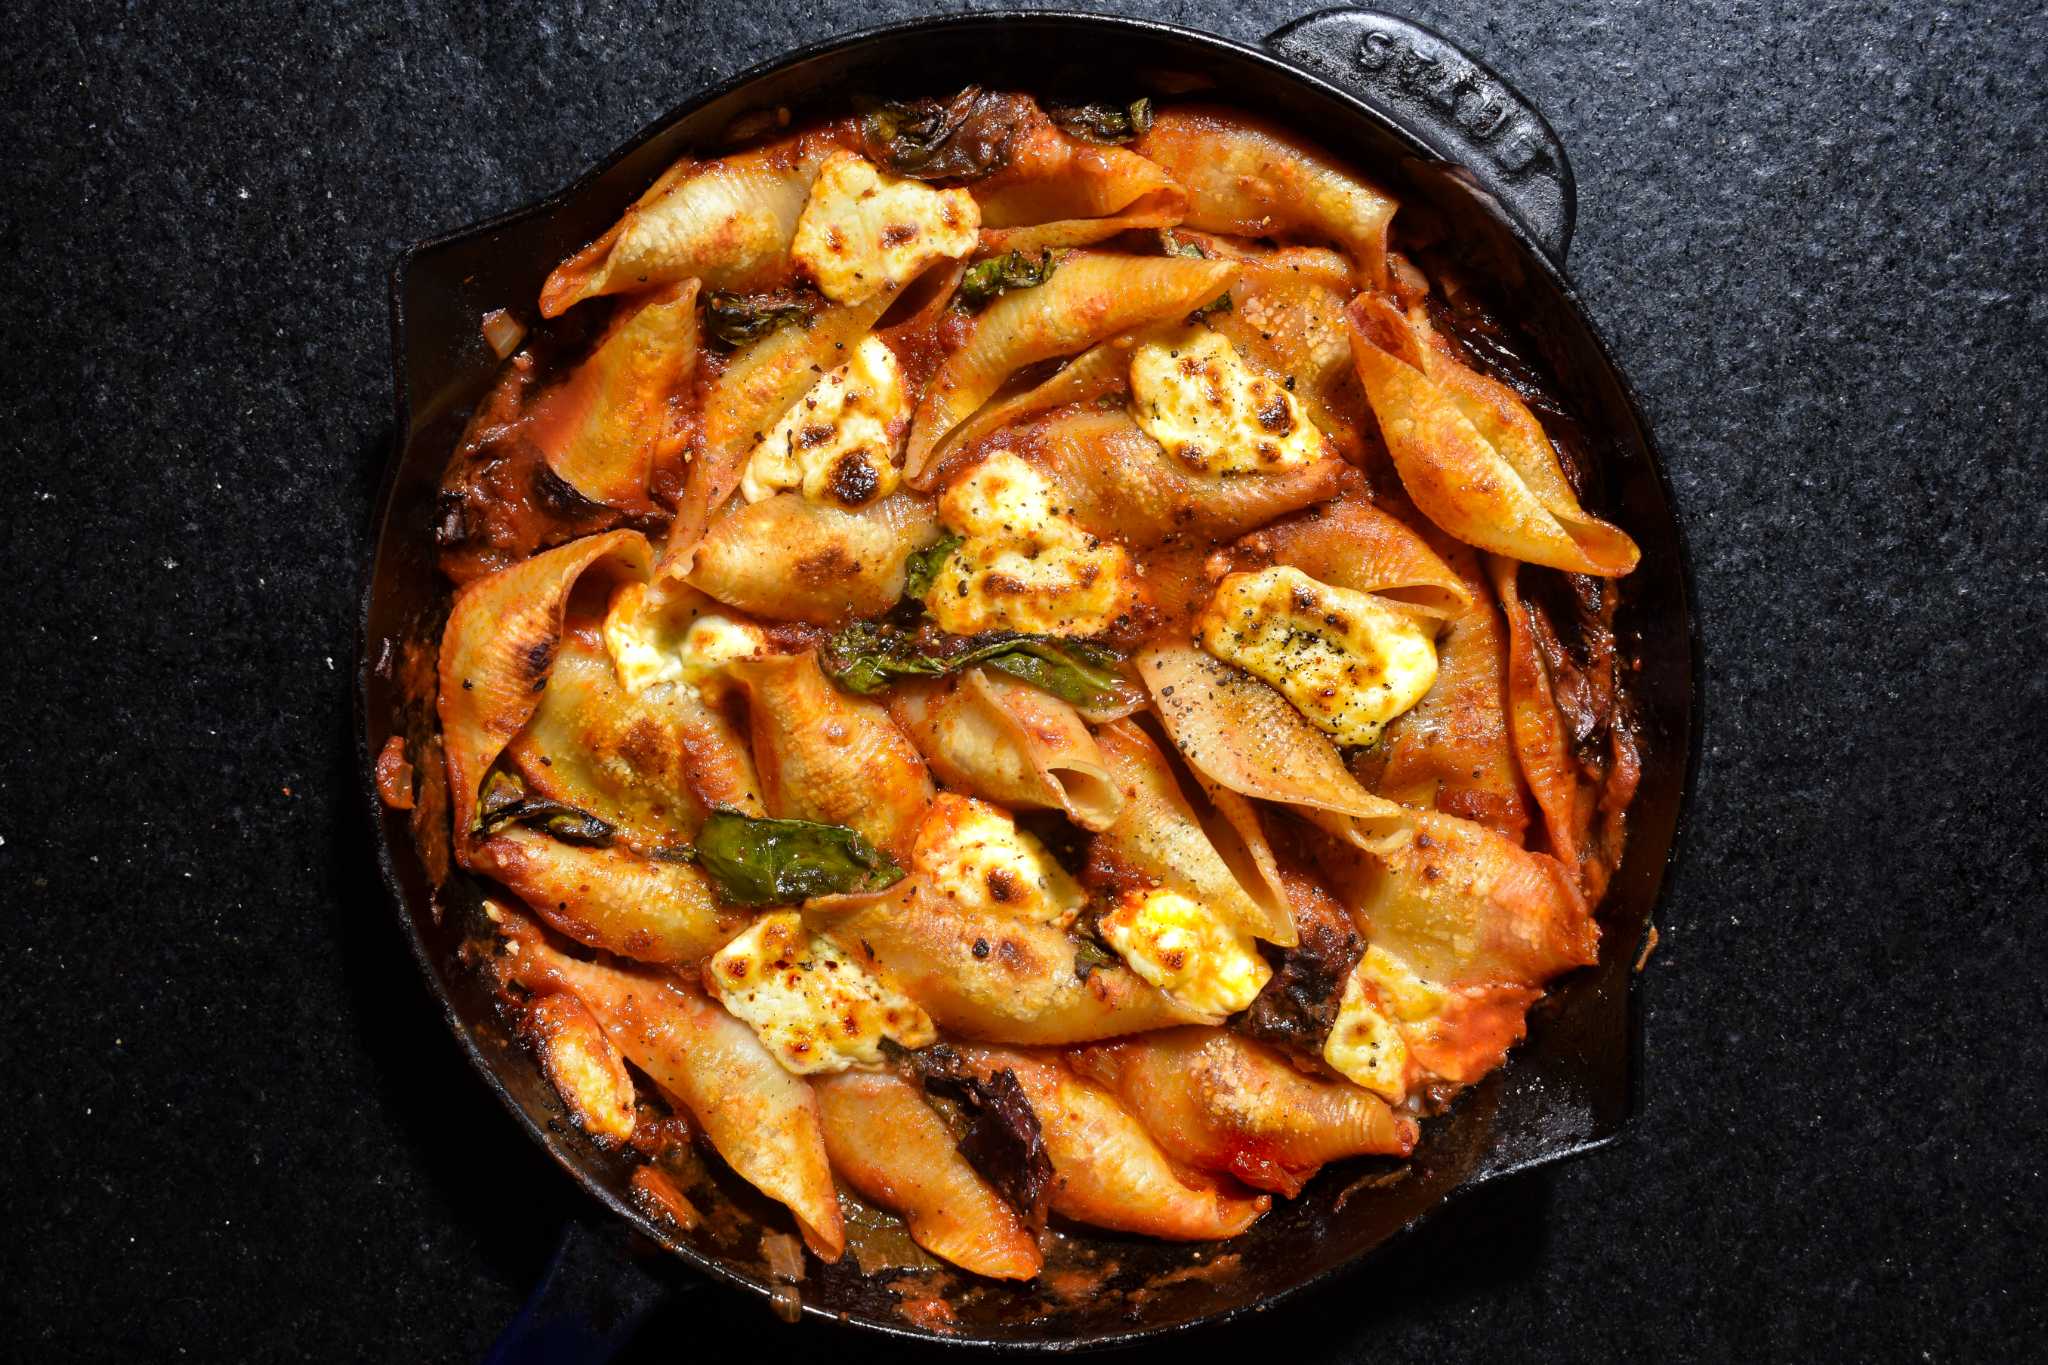 Recipe: Baked Pasta Shells with Tomato, Ricotta and Chard